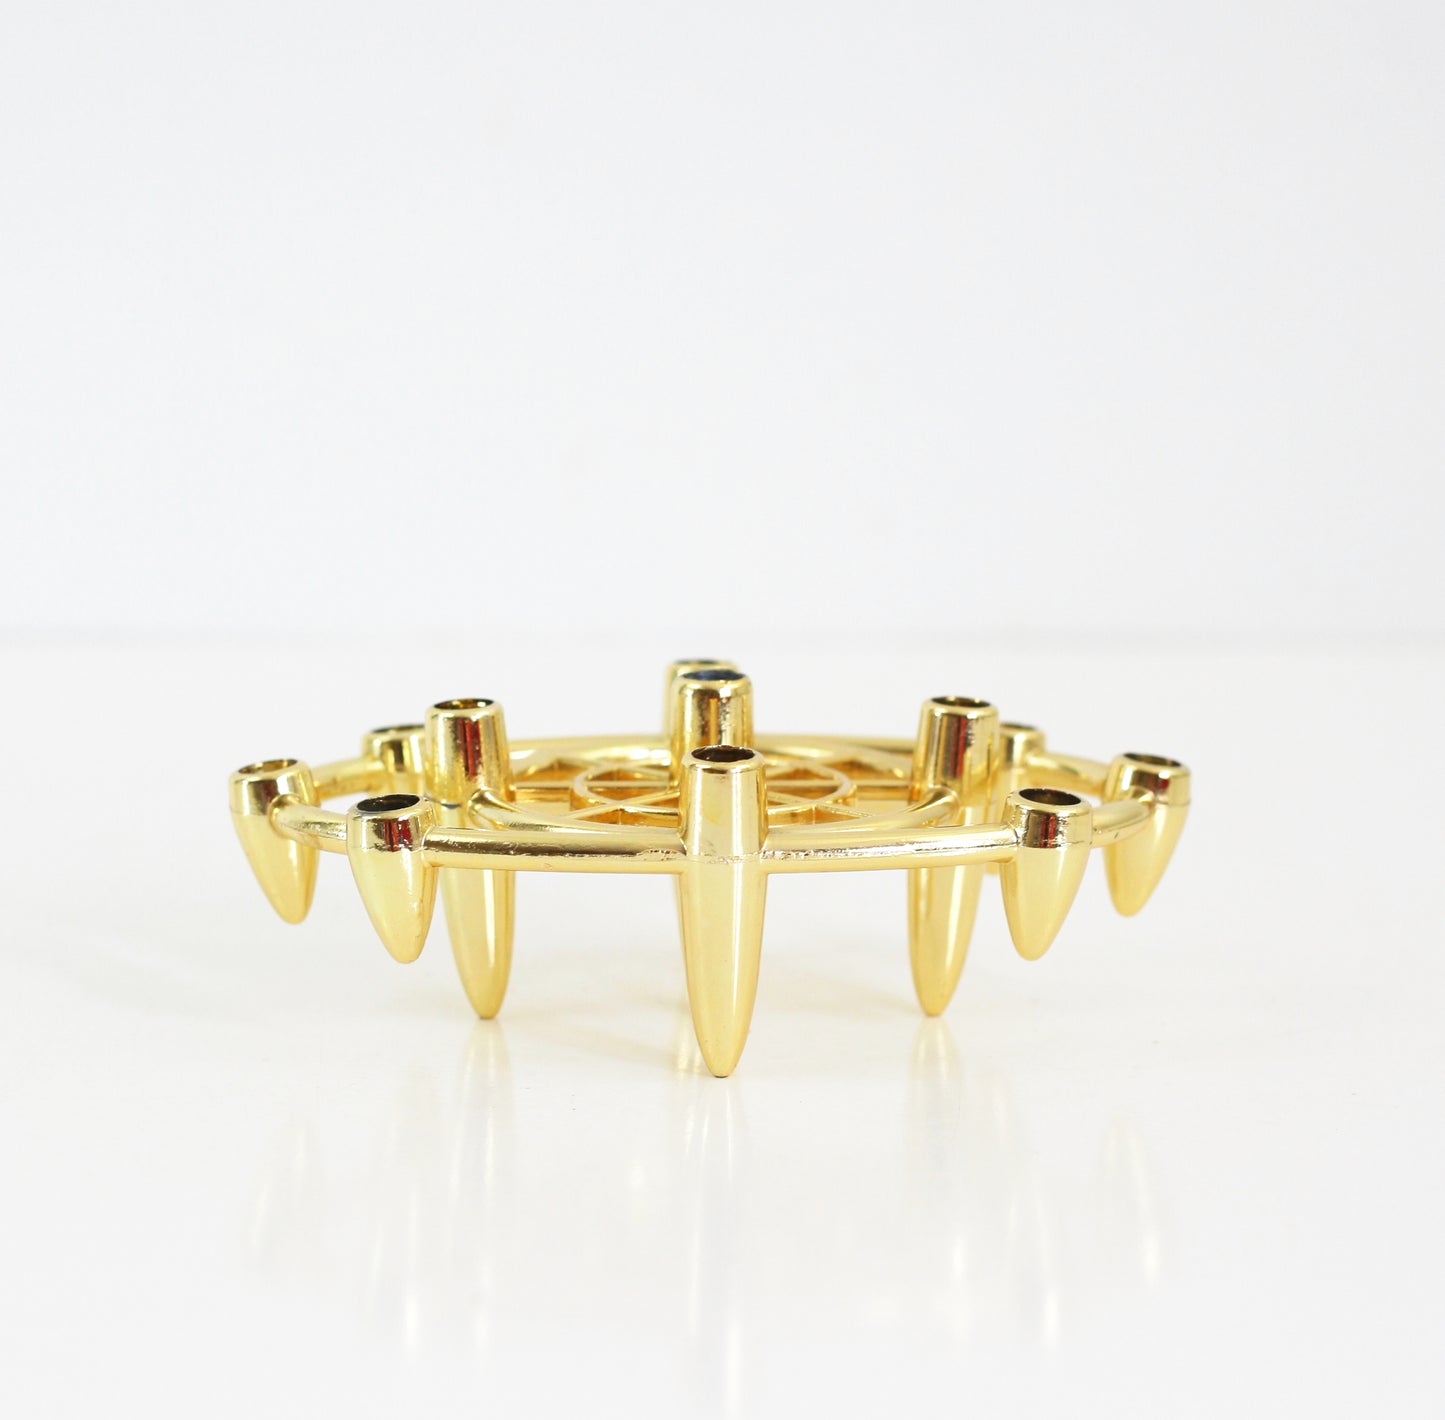 SOLD - Mid Century Modern Gold Tiny Taper Candle Holder